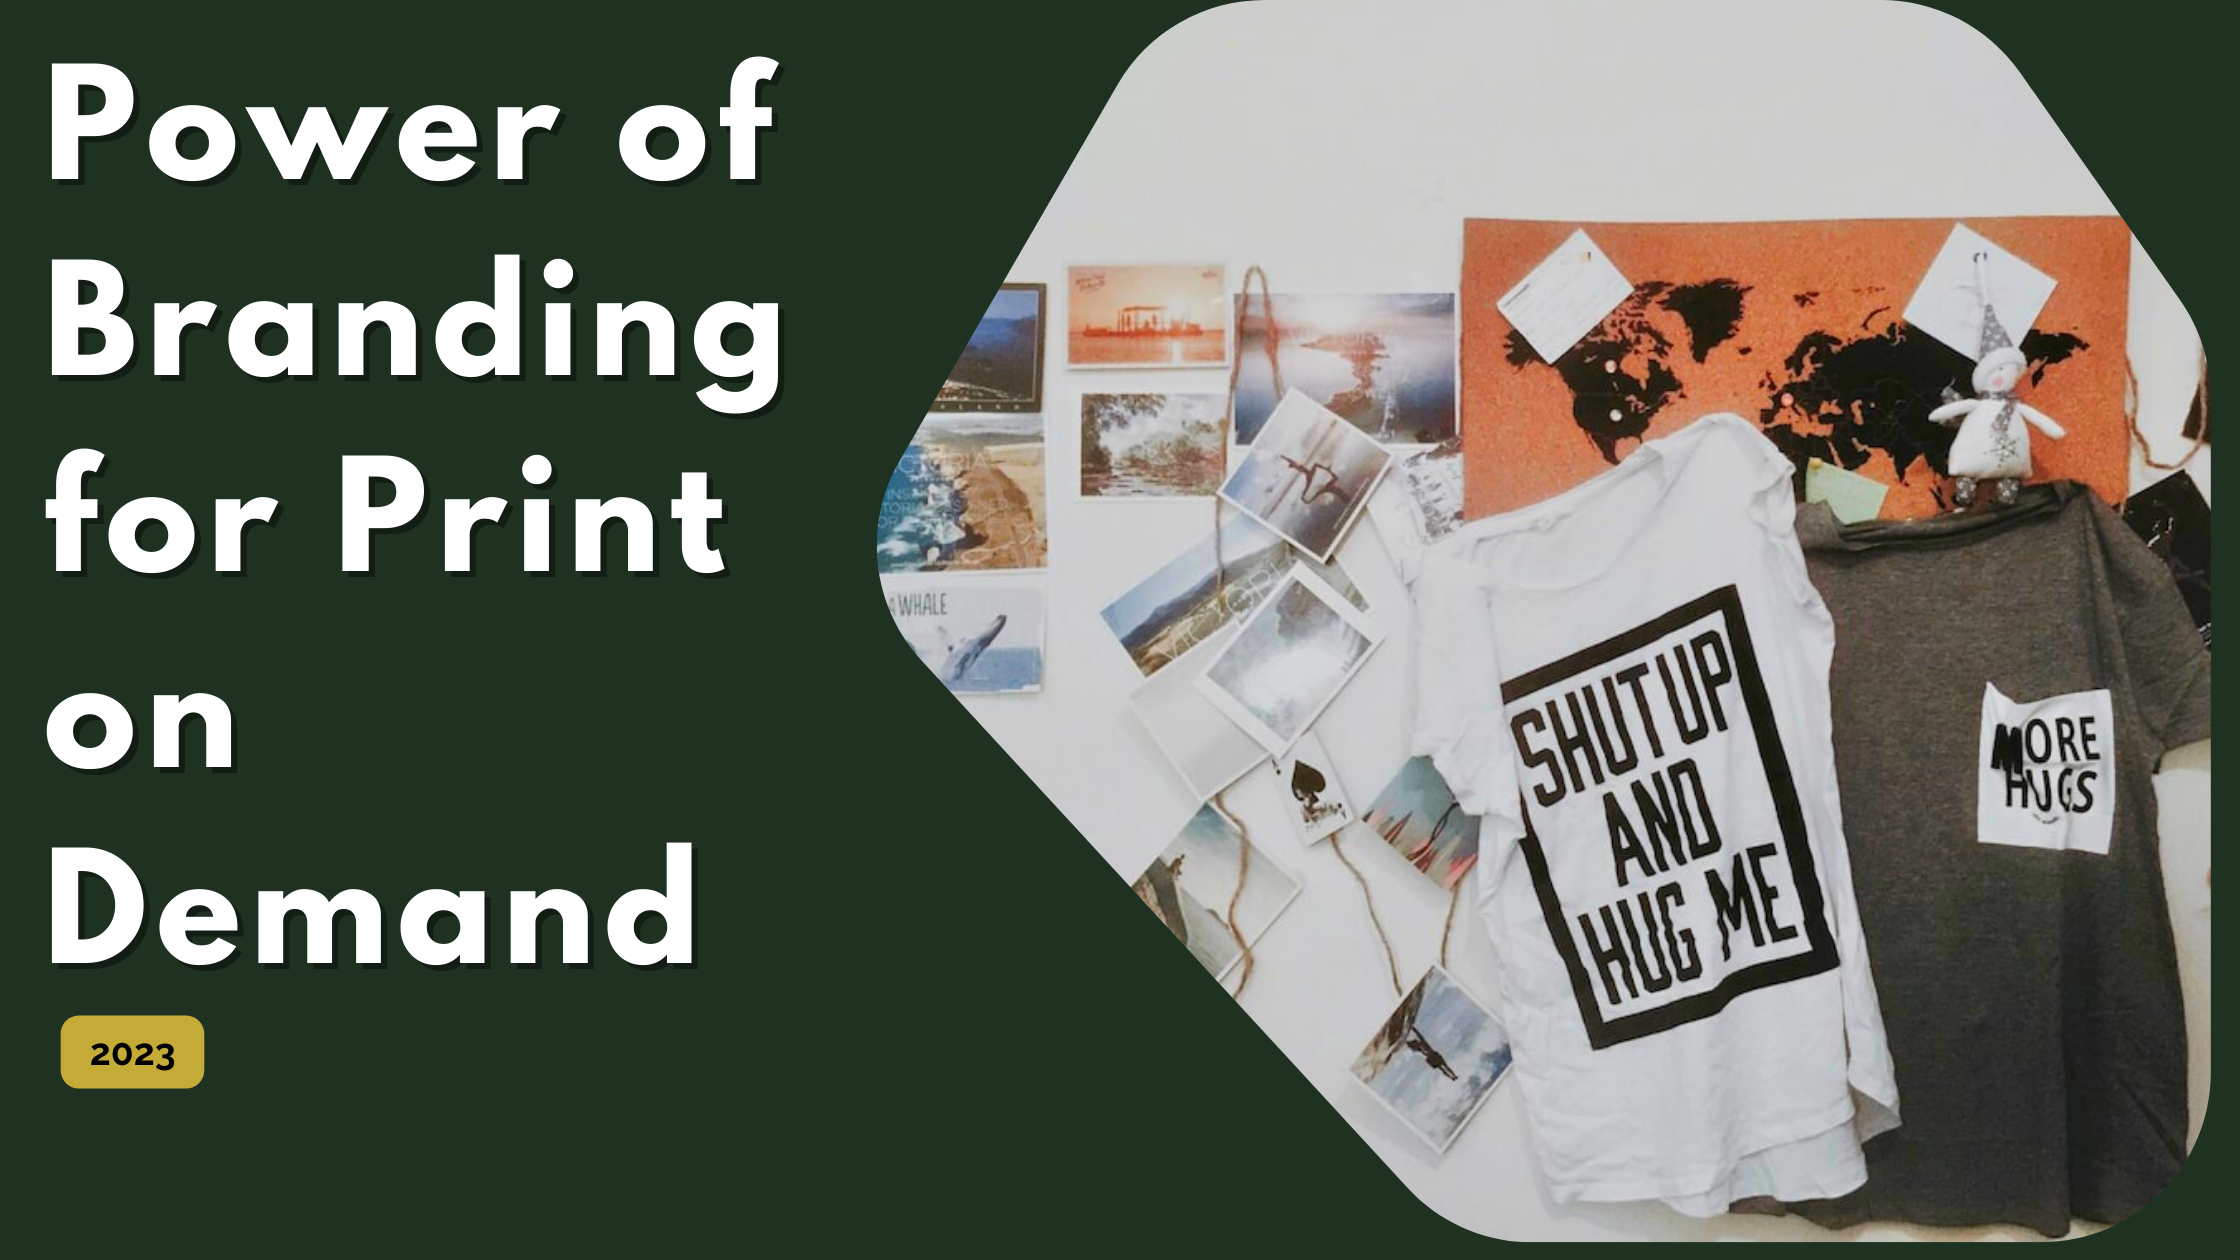 The Power of Branding for Your Print on Demand Business